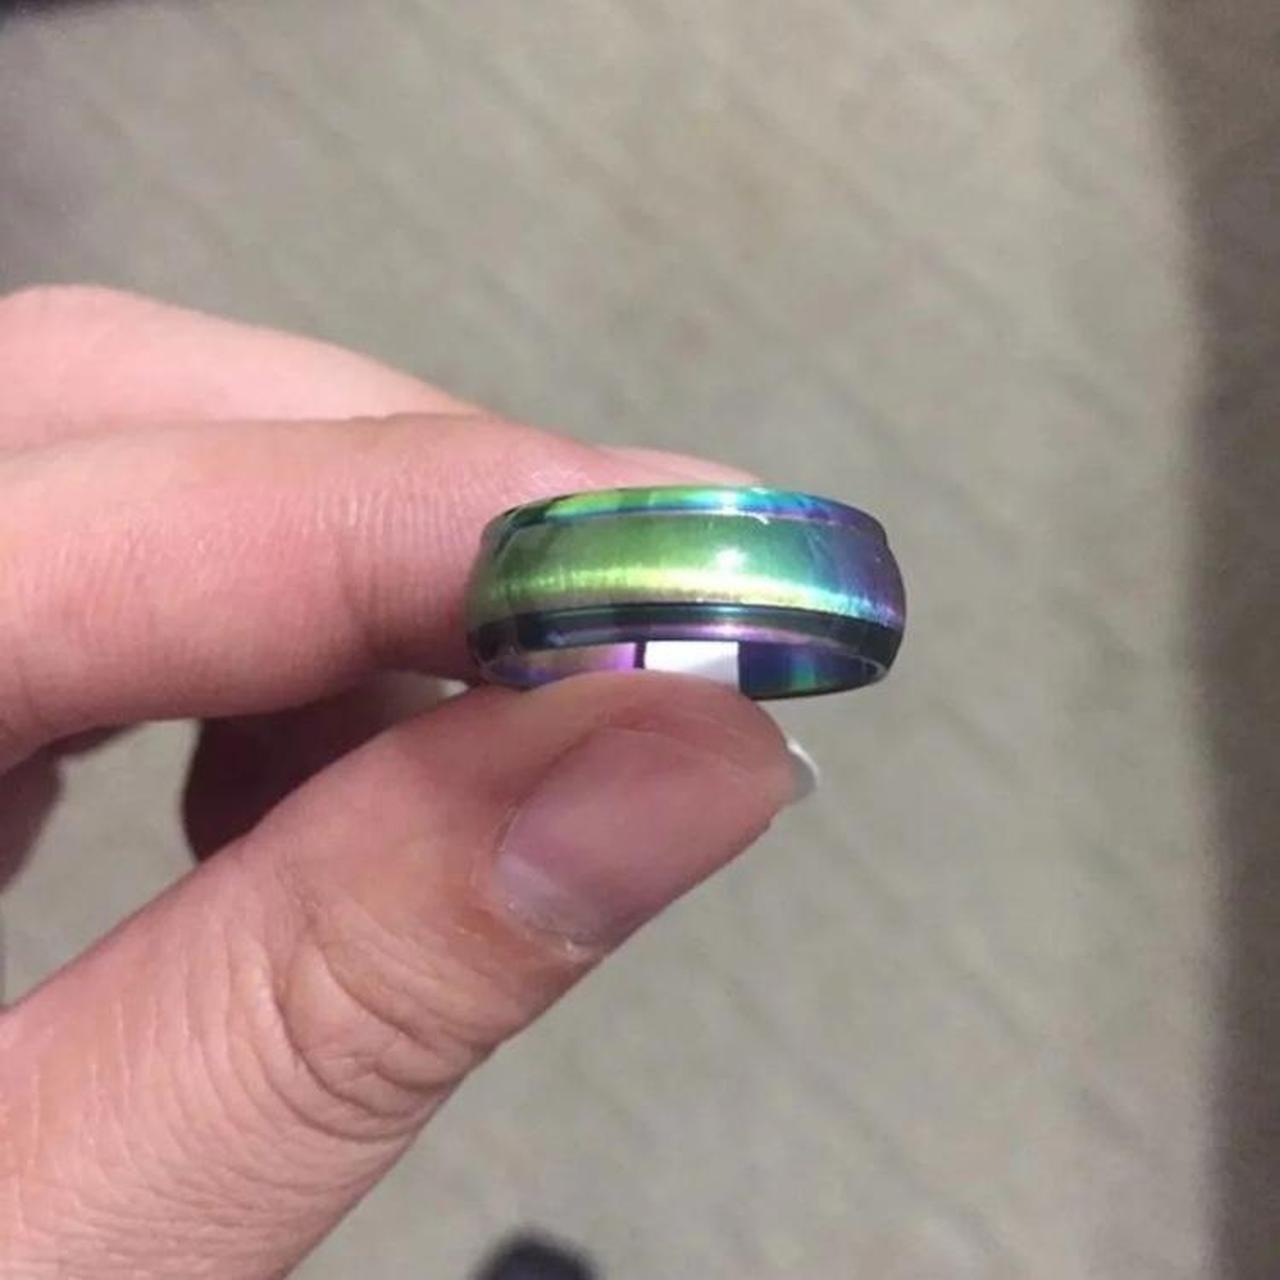 Product Image 2 - 6mm rainbow ring
Condition: 100% brand